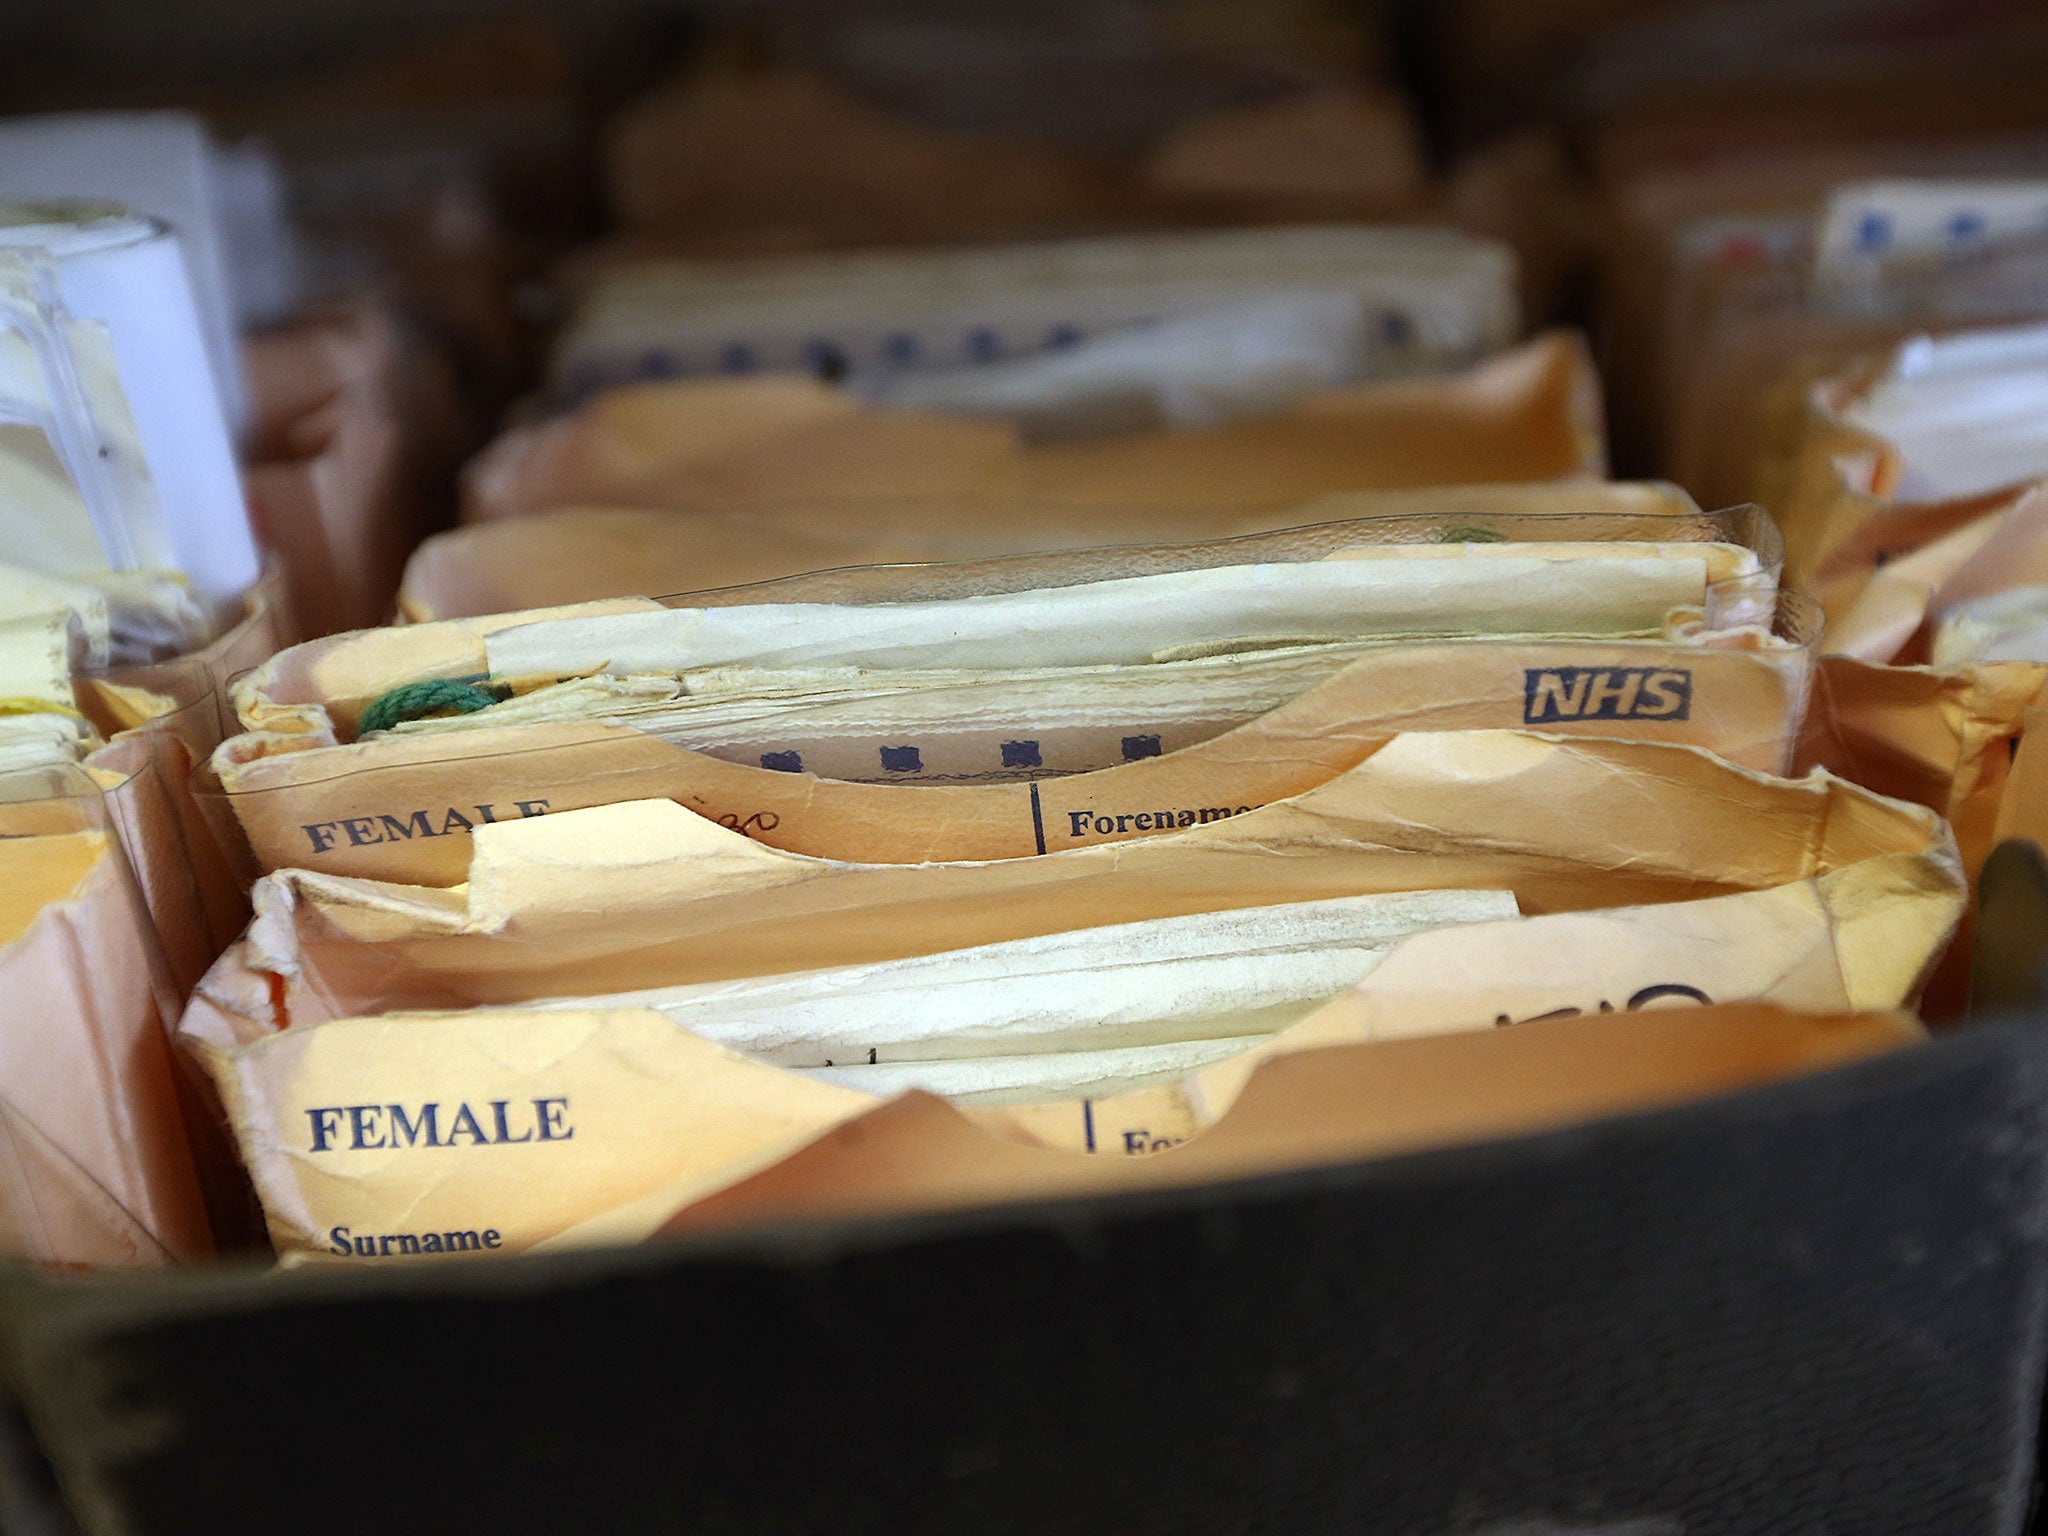 The annual cost of storing paper records is up to £1m for each healthcare trust, according to government estimates